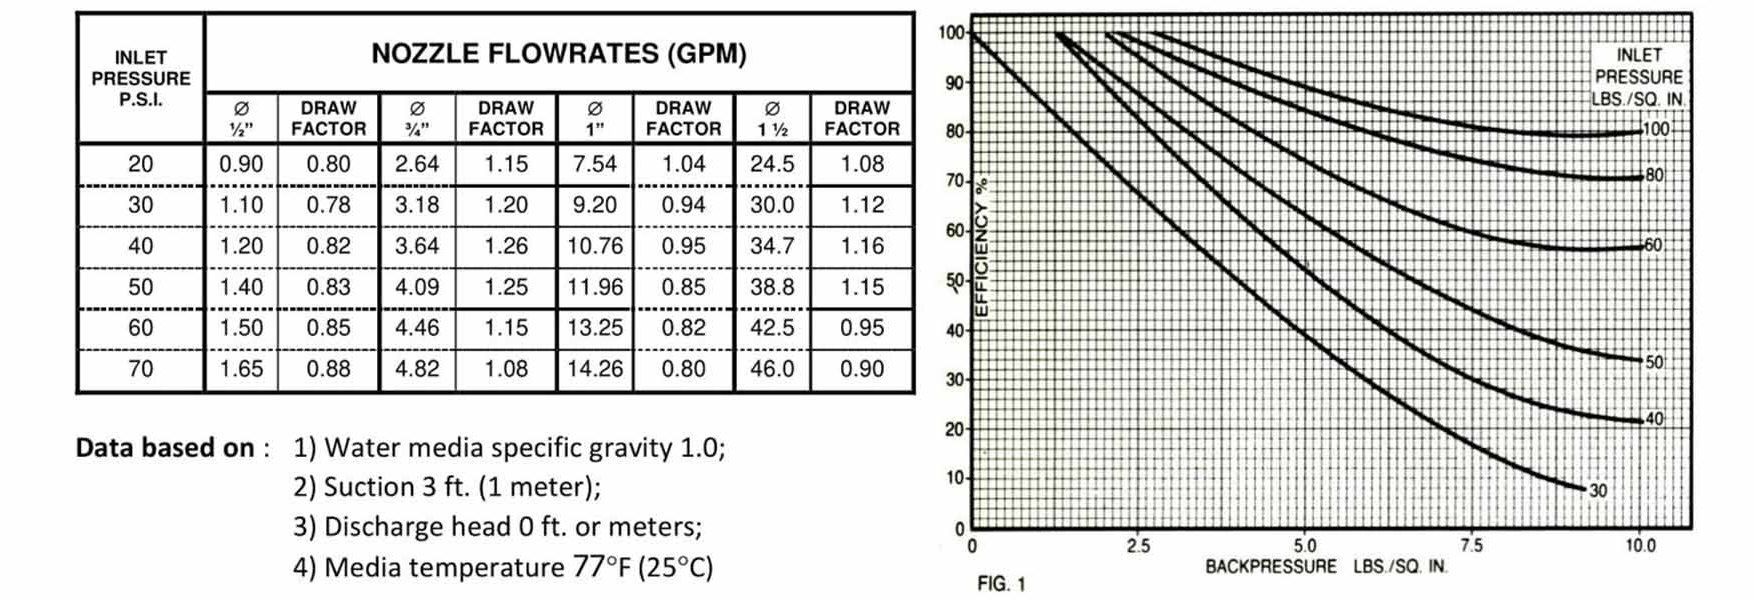 nozzle flowrates gpm various depending on inlet pressure PSI